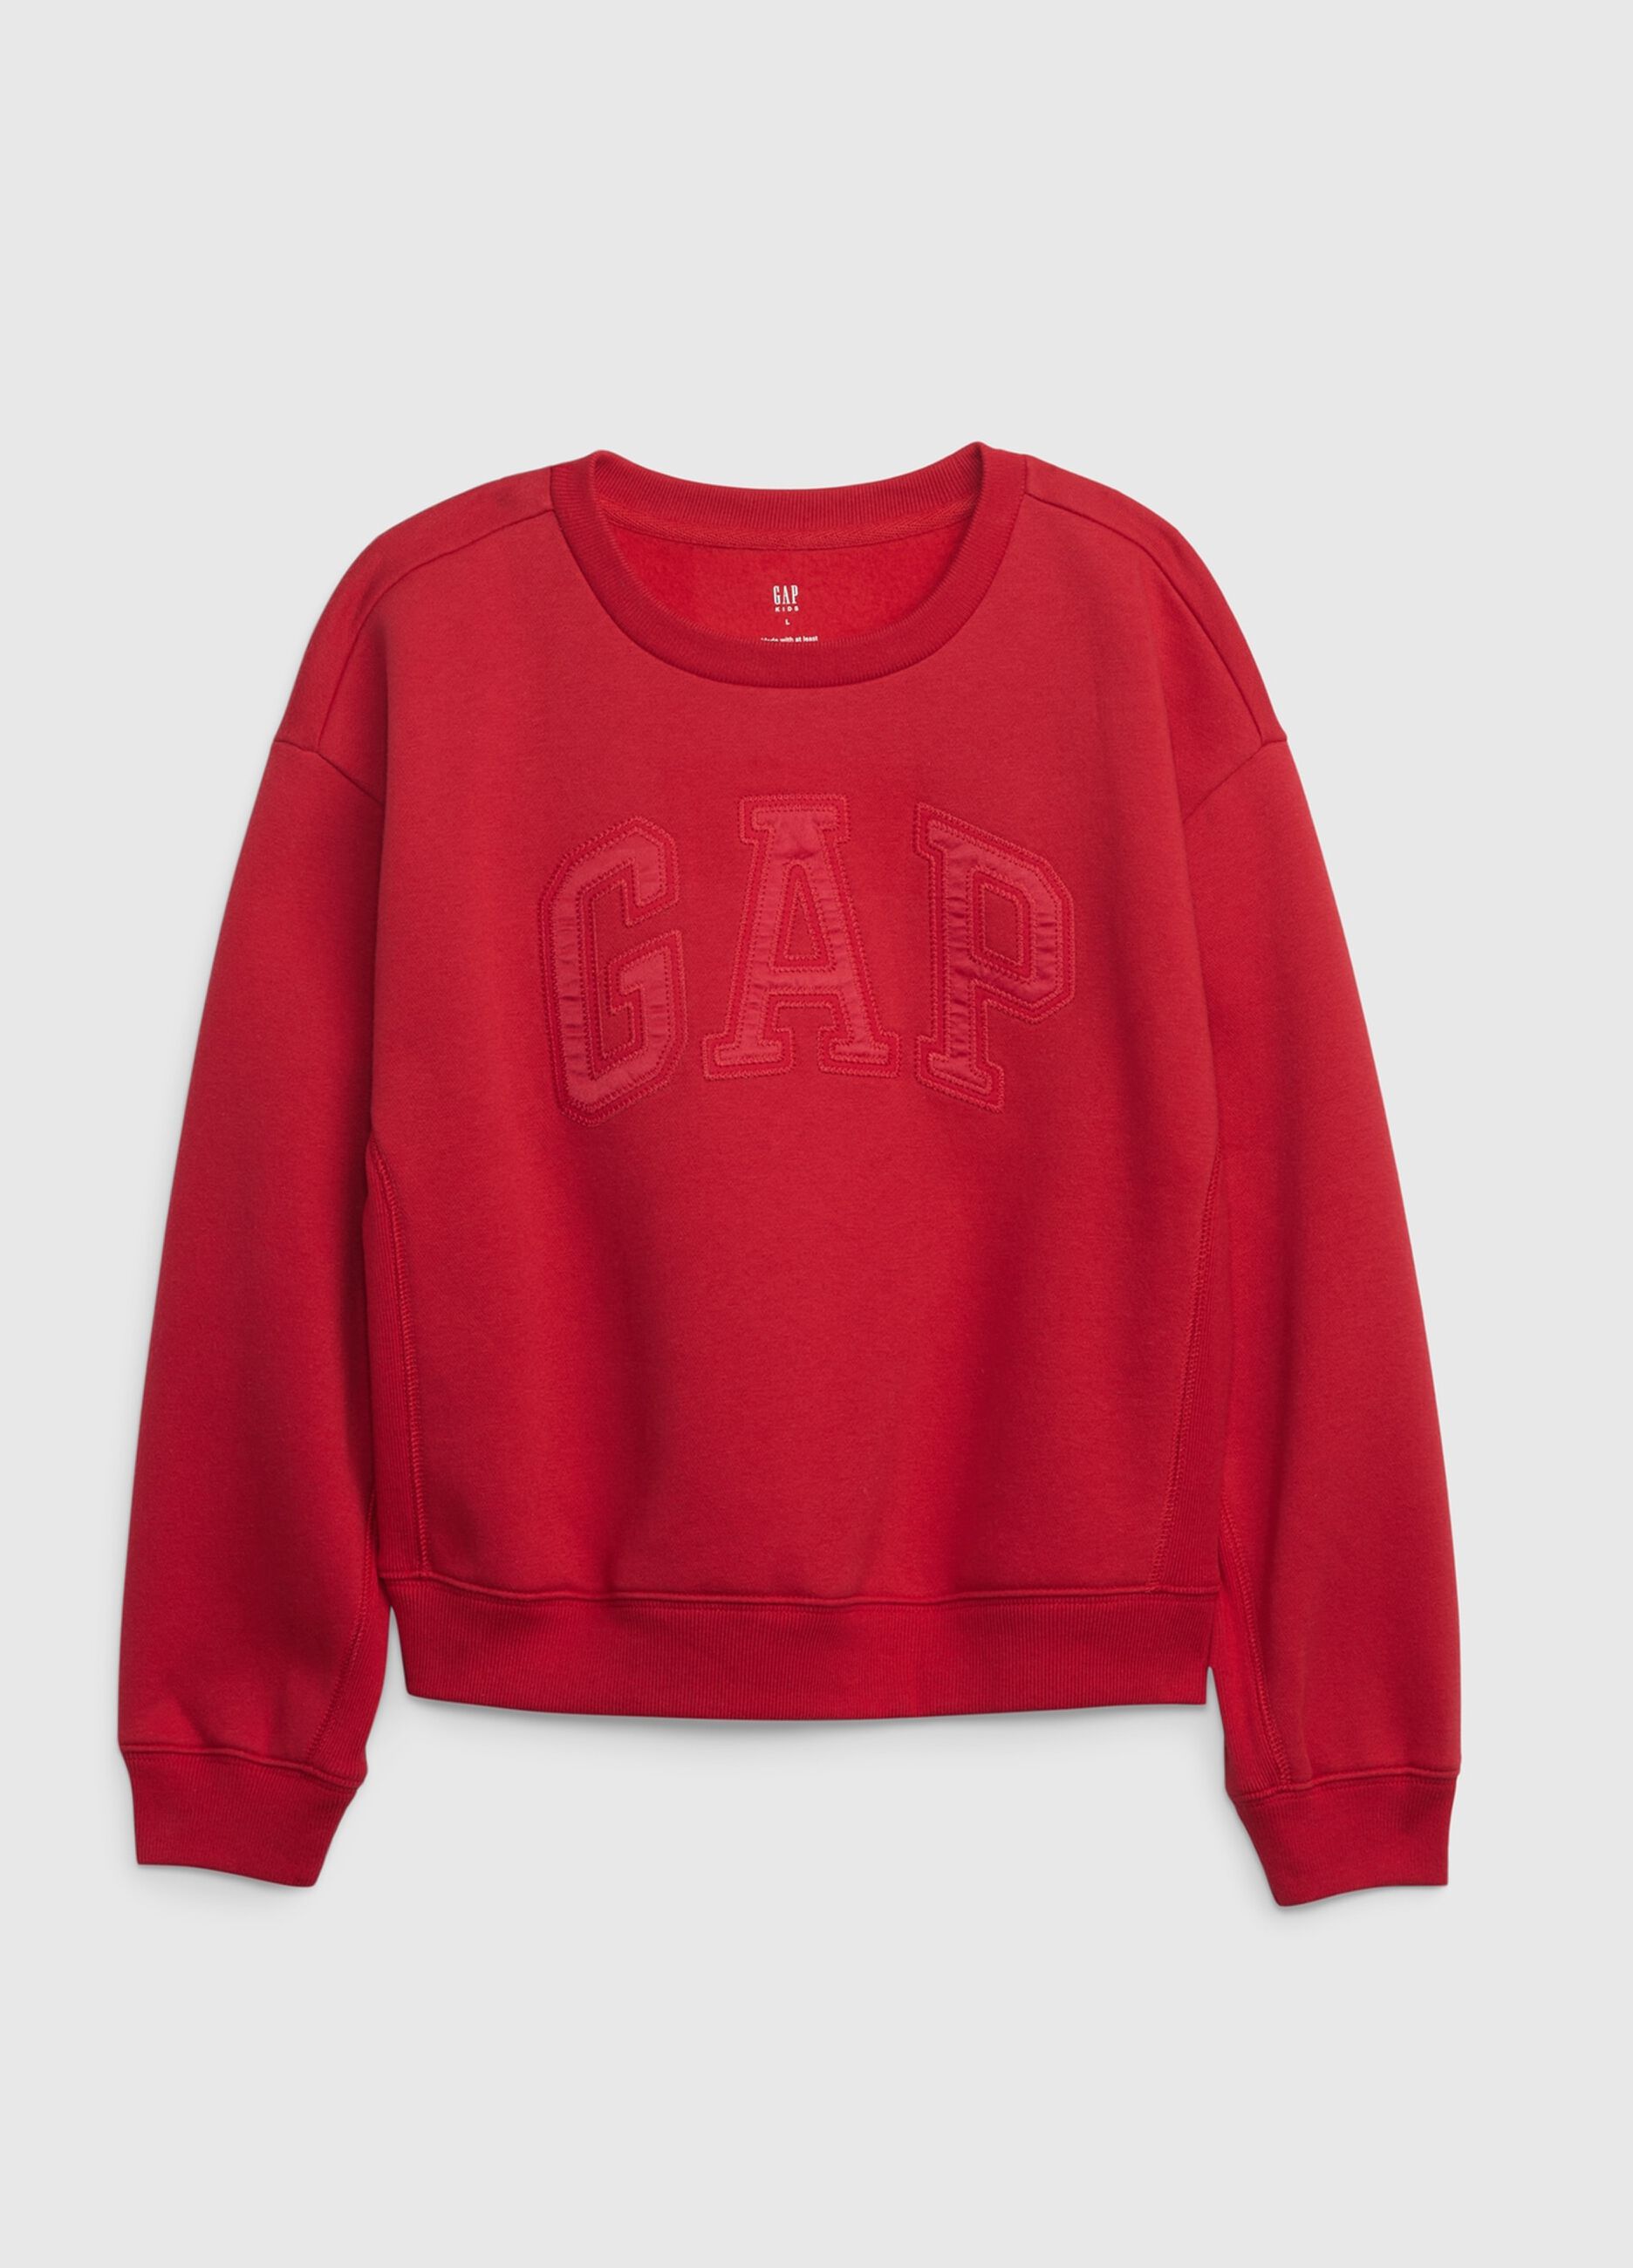 Sweatshirt with round neck and logo patch